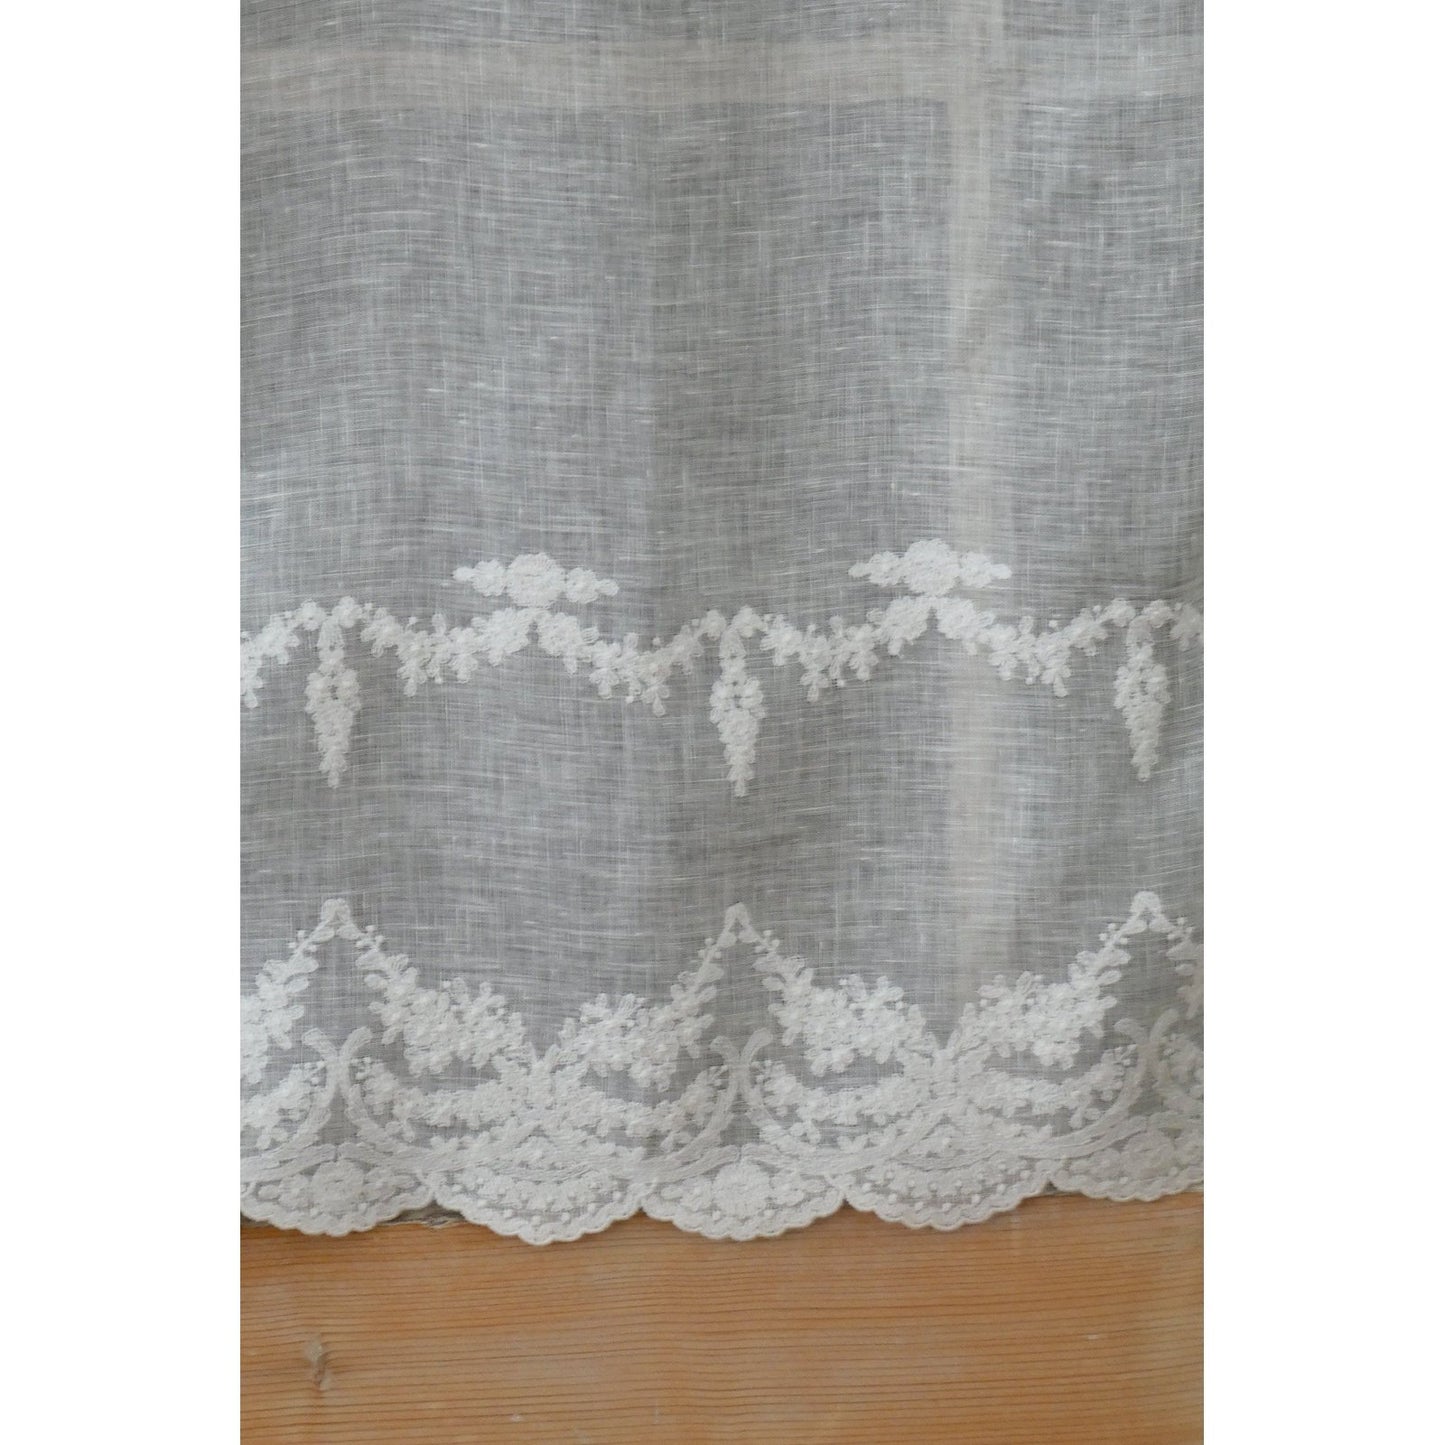 Close-up of embroidered details on off-white linen short curtain.